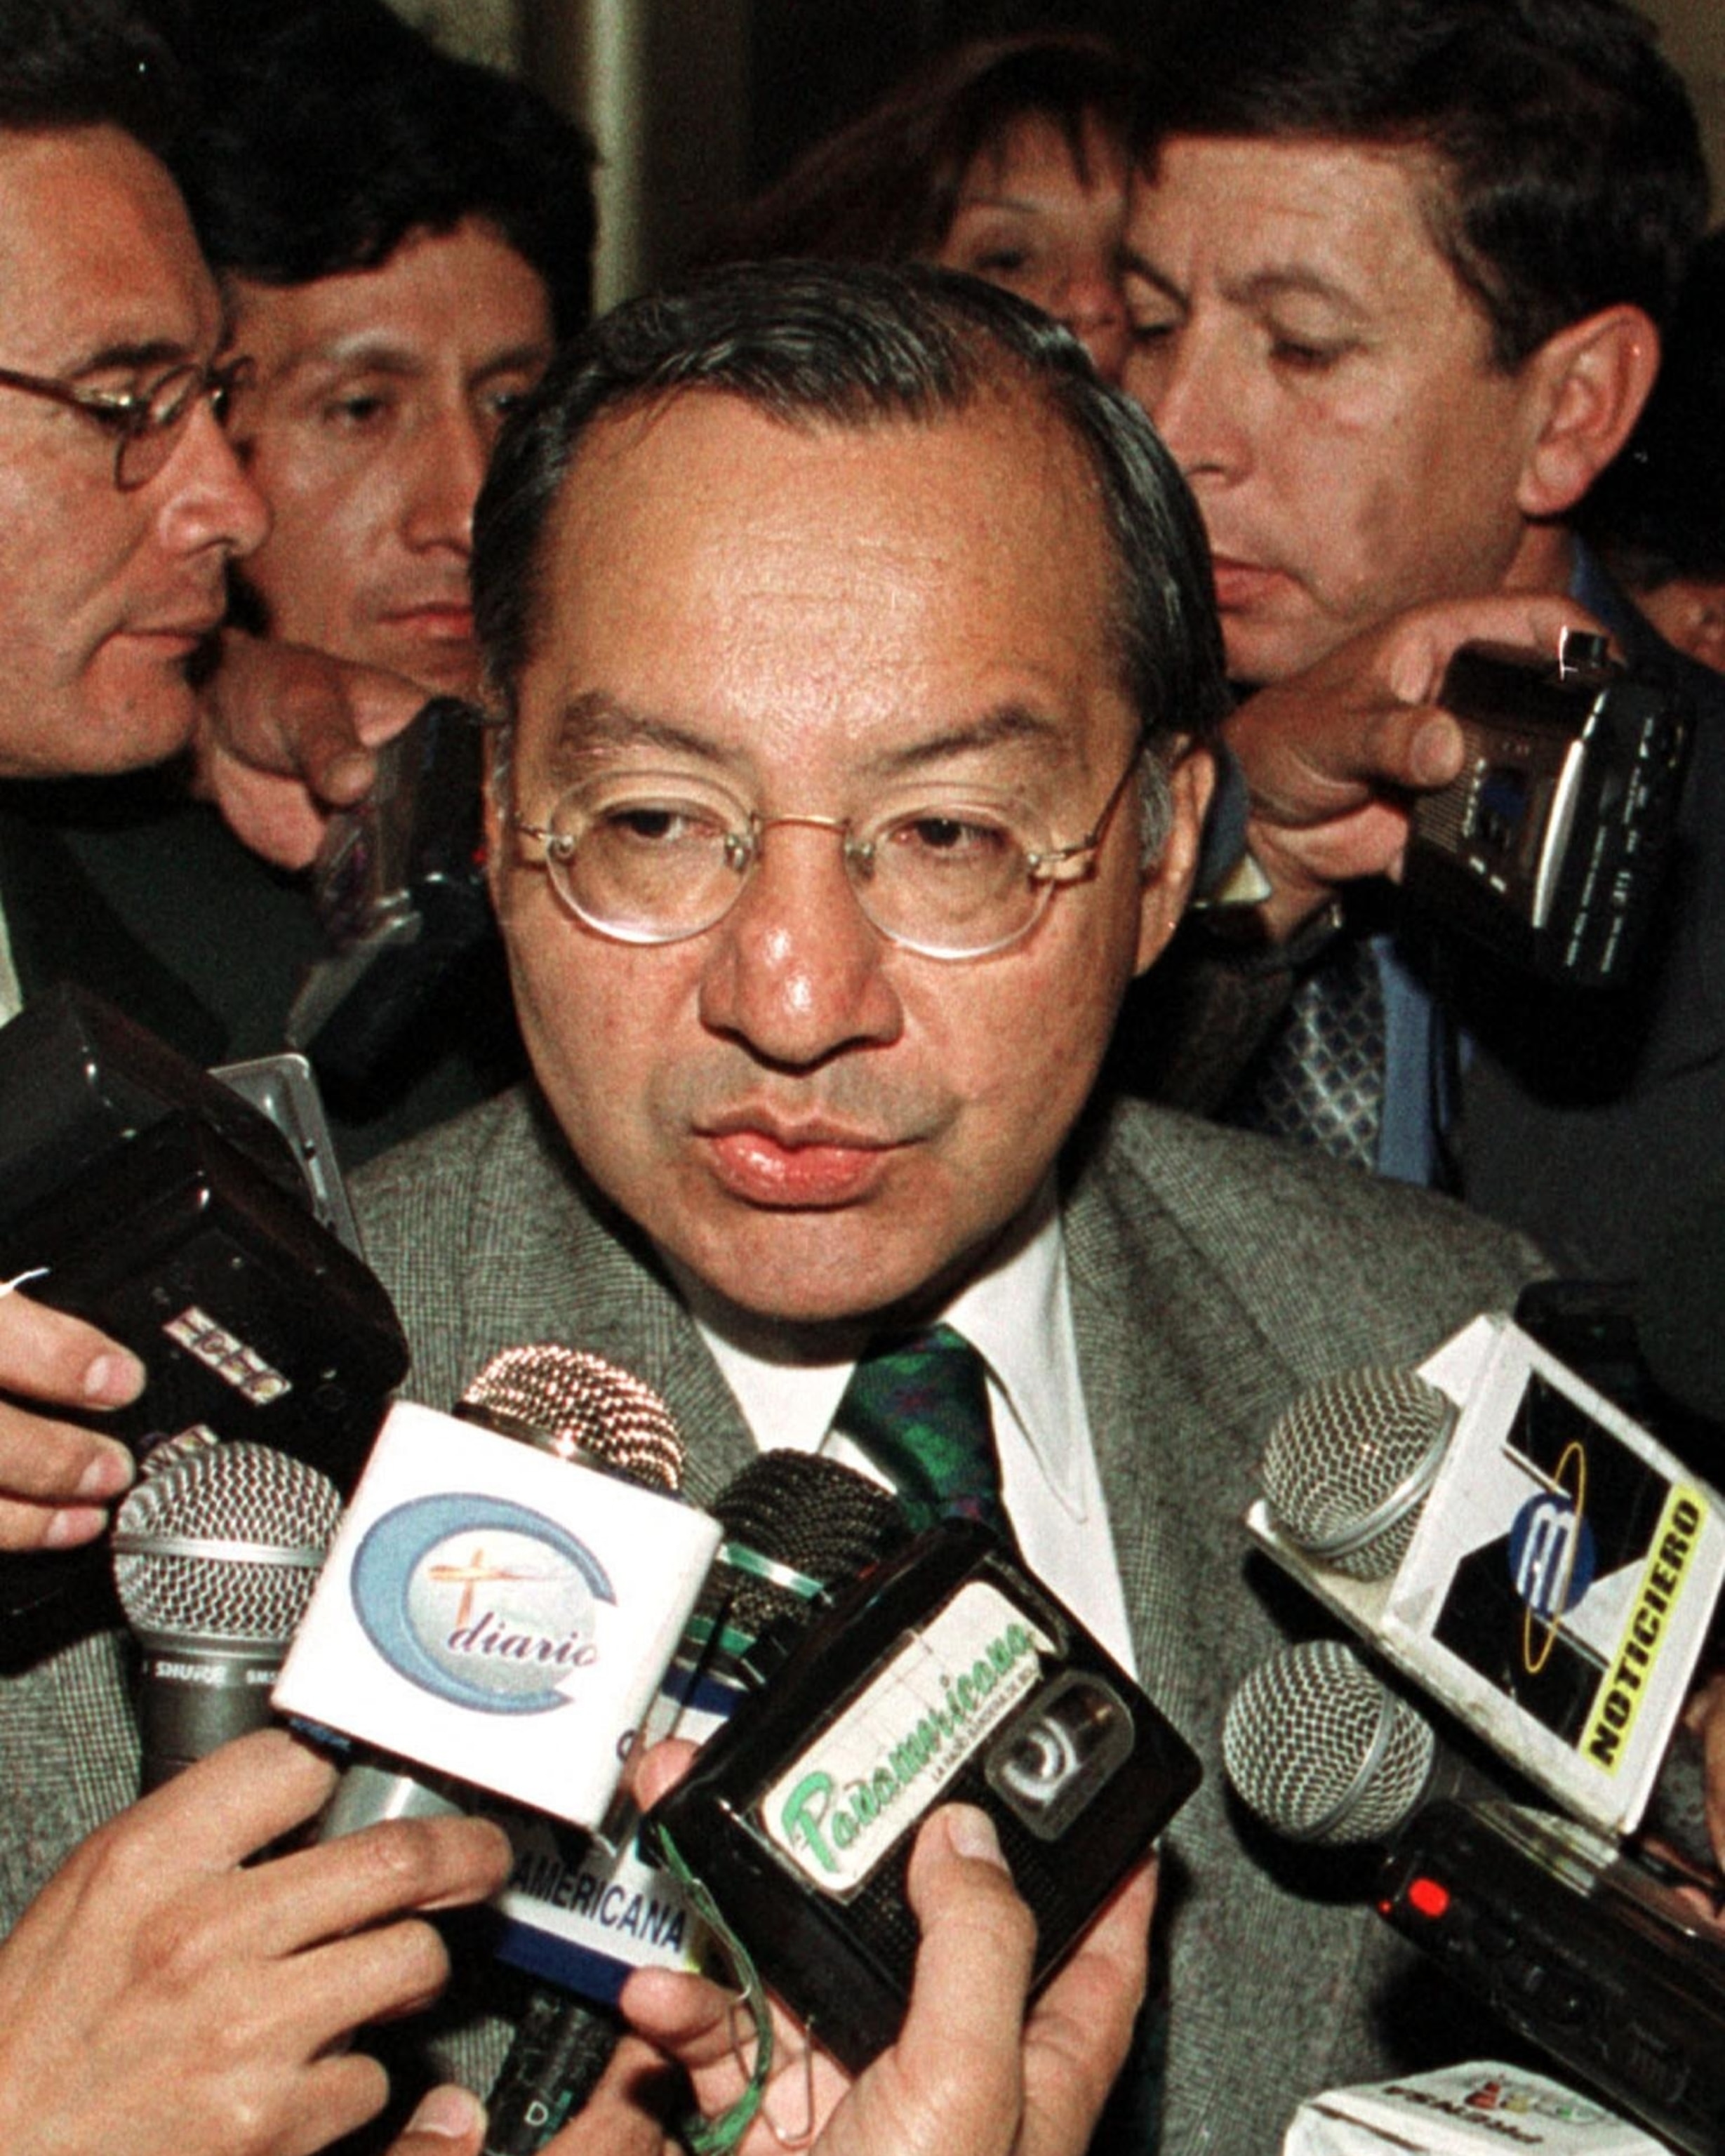 PHOTO: U.S. Ambassador to Bolivia Manuel Rocha speaks to members of the press in La Paz on July 11, 2001. He has been charged with spying for Cuba for 40 years, the Justice Department announced on Dec. 4, 2023.